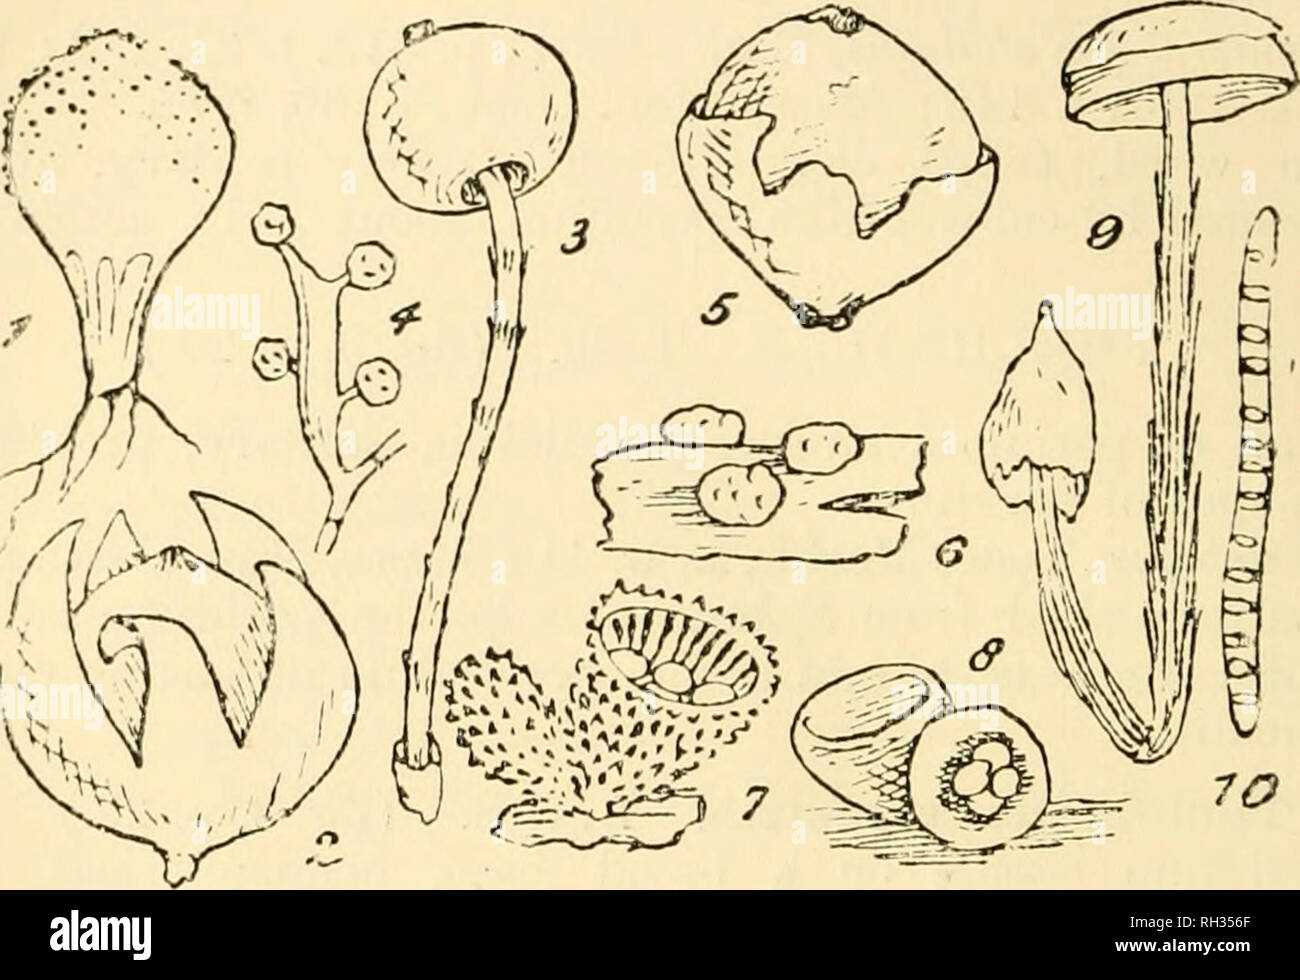 . British fungus-flora. A classified text-book of mycology. Fungi -- Great Britain. 28 FUNGUS-FLORA.. FIGURES ILLUSTRATING THE LYCOPEEDEAE, ALSO THE NIDULAEIEAE IN PART. Fig. 1, LycMperdon pyriforme, one-third iiat. size;—Fig. 2, Gender hygrometricus; the outer wall of the peridium is split into pointed teetii; lialf uat. size;—Fig. 3, Tulostoma mammomm, entire plant; nat. size;— Fig. 4, basidium of same, the four spores are borne laterally; this differs from the basidia of A^u-iculana aud Fllaere in not being transversely septate ; highly mag.;—F'ig. 5, Lyroperdon nuirescenx, showing thescpav Stock Photo